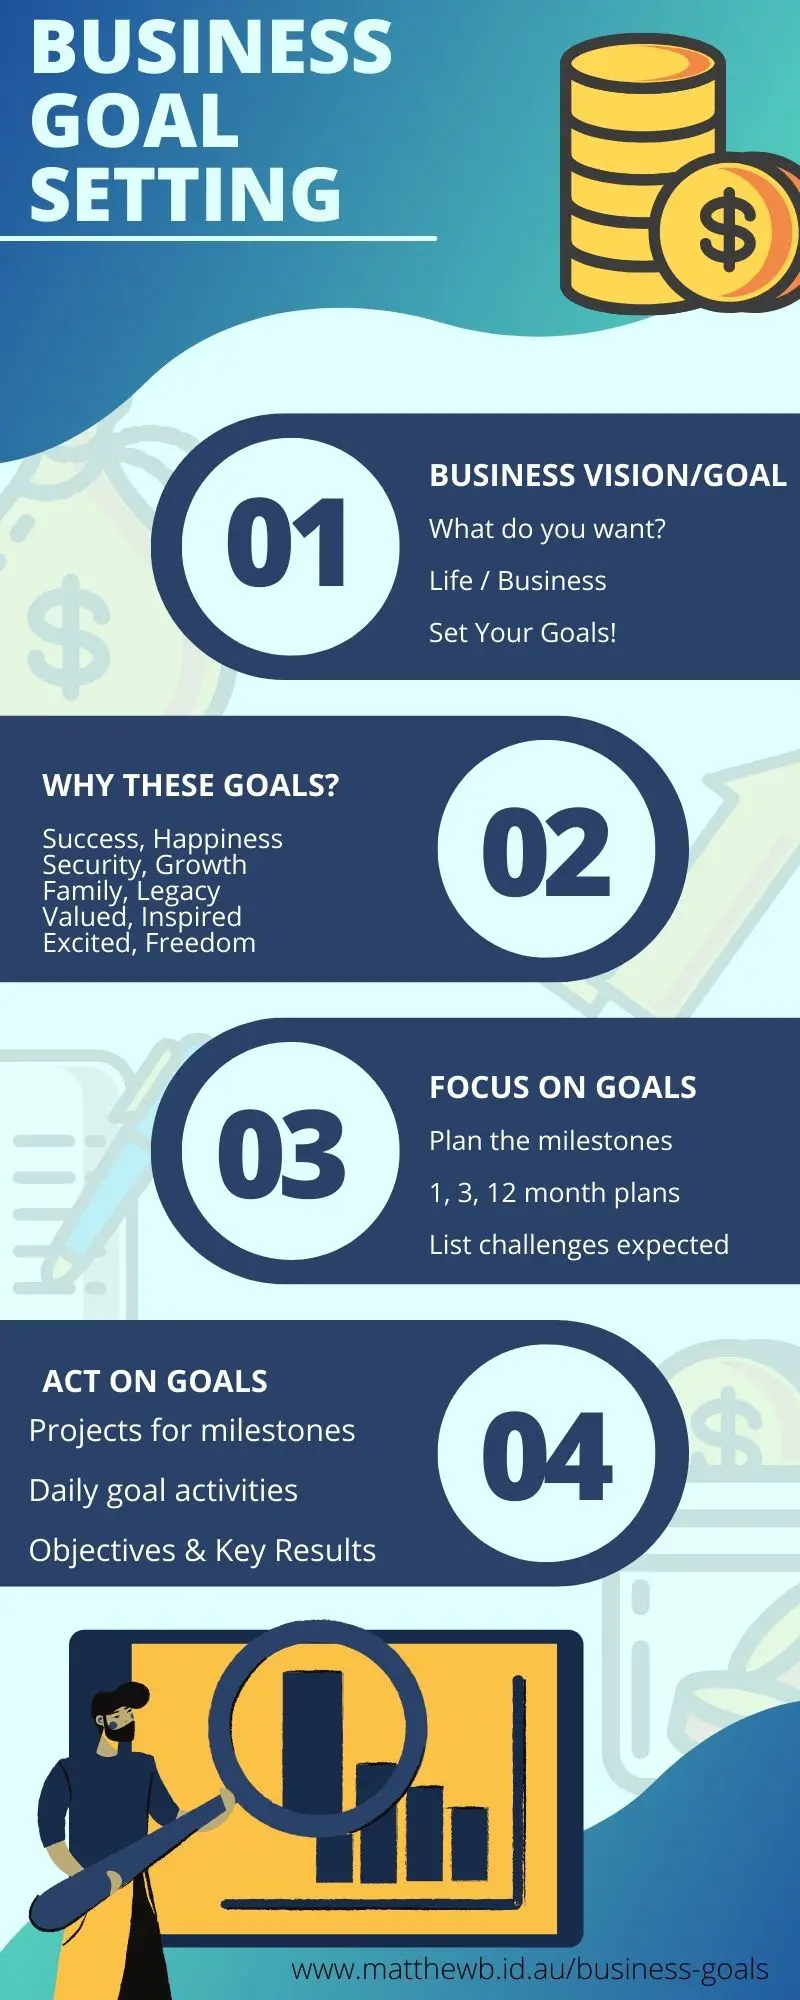 Business Goal Setting Infographic